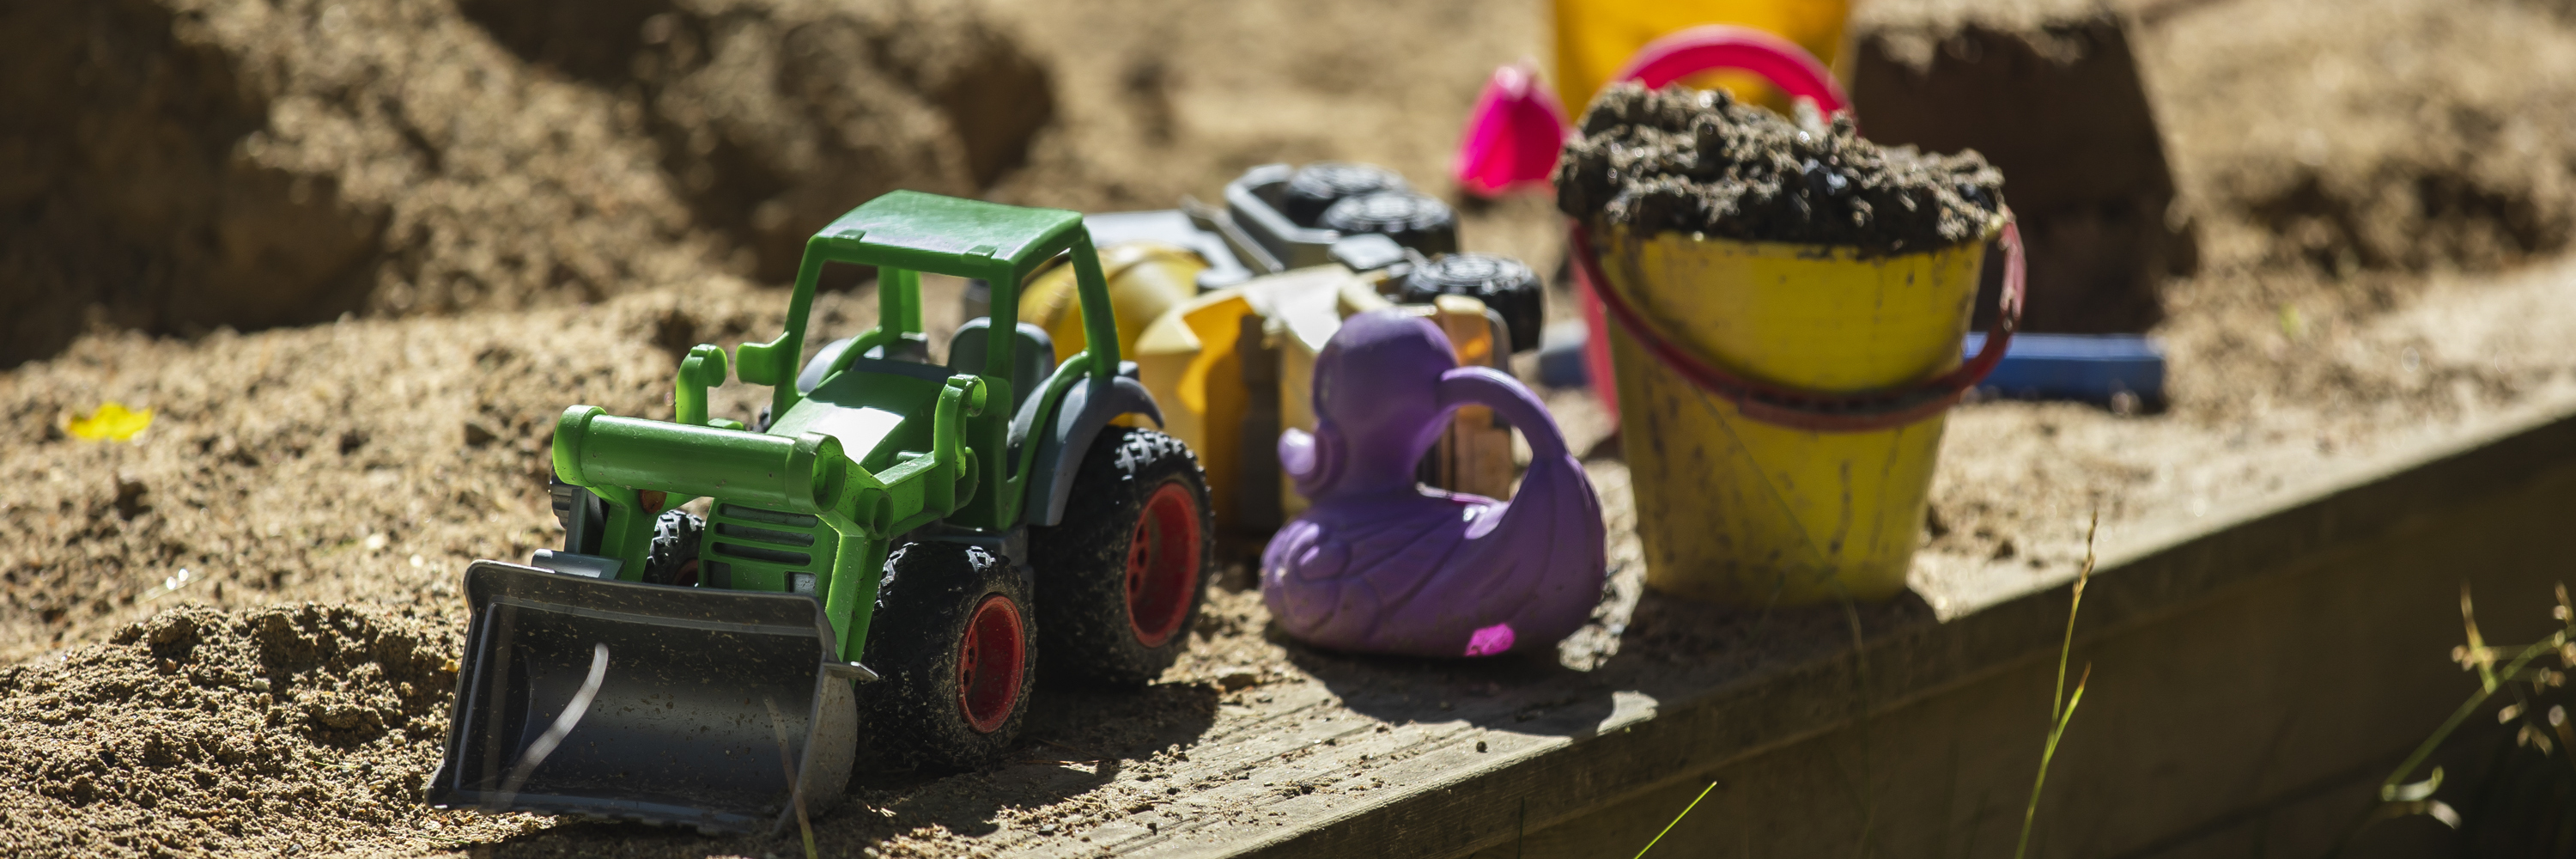 Children's sand toys on the edge of a sandpit.